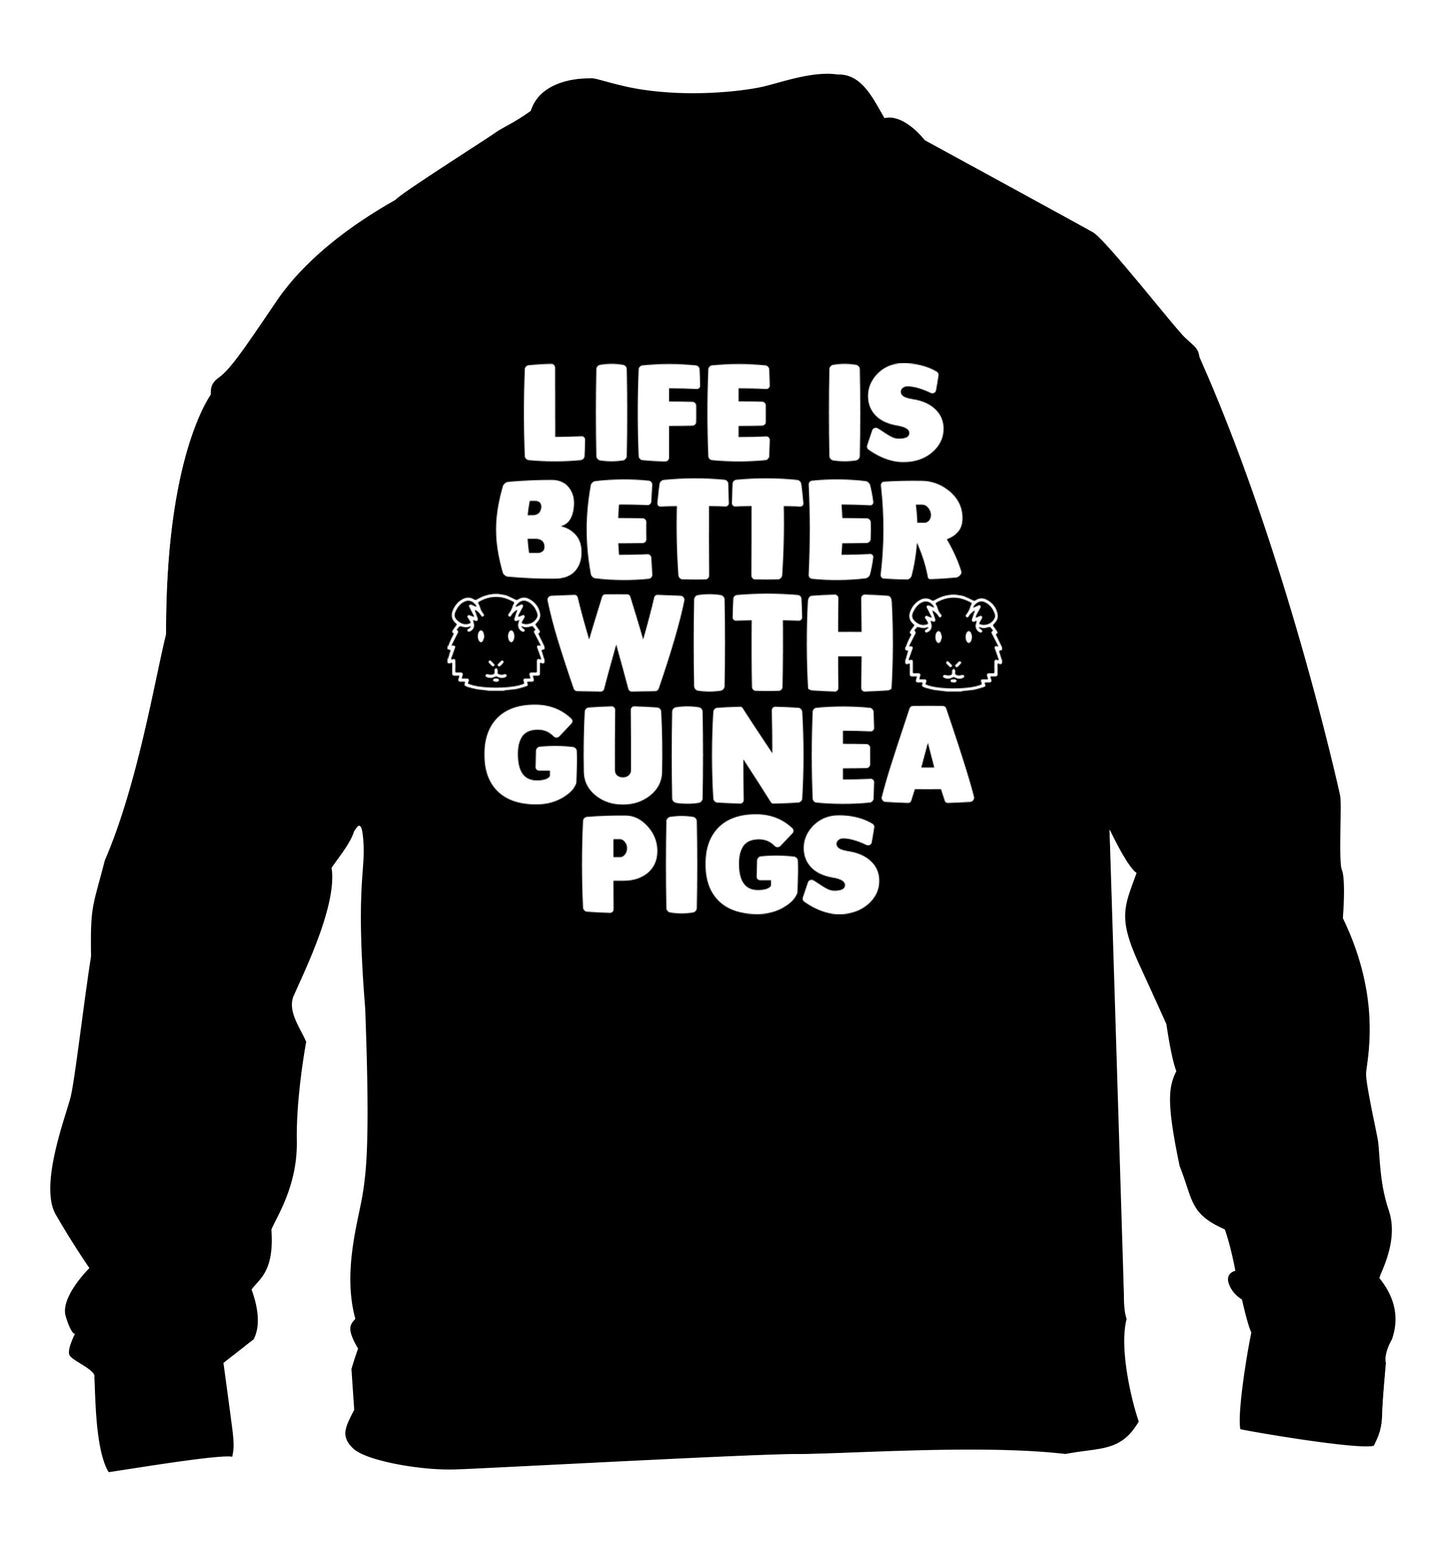 Life is better with guinea pigs children's black  sweater 12-14 Years